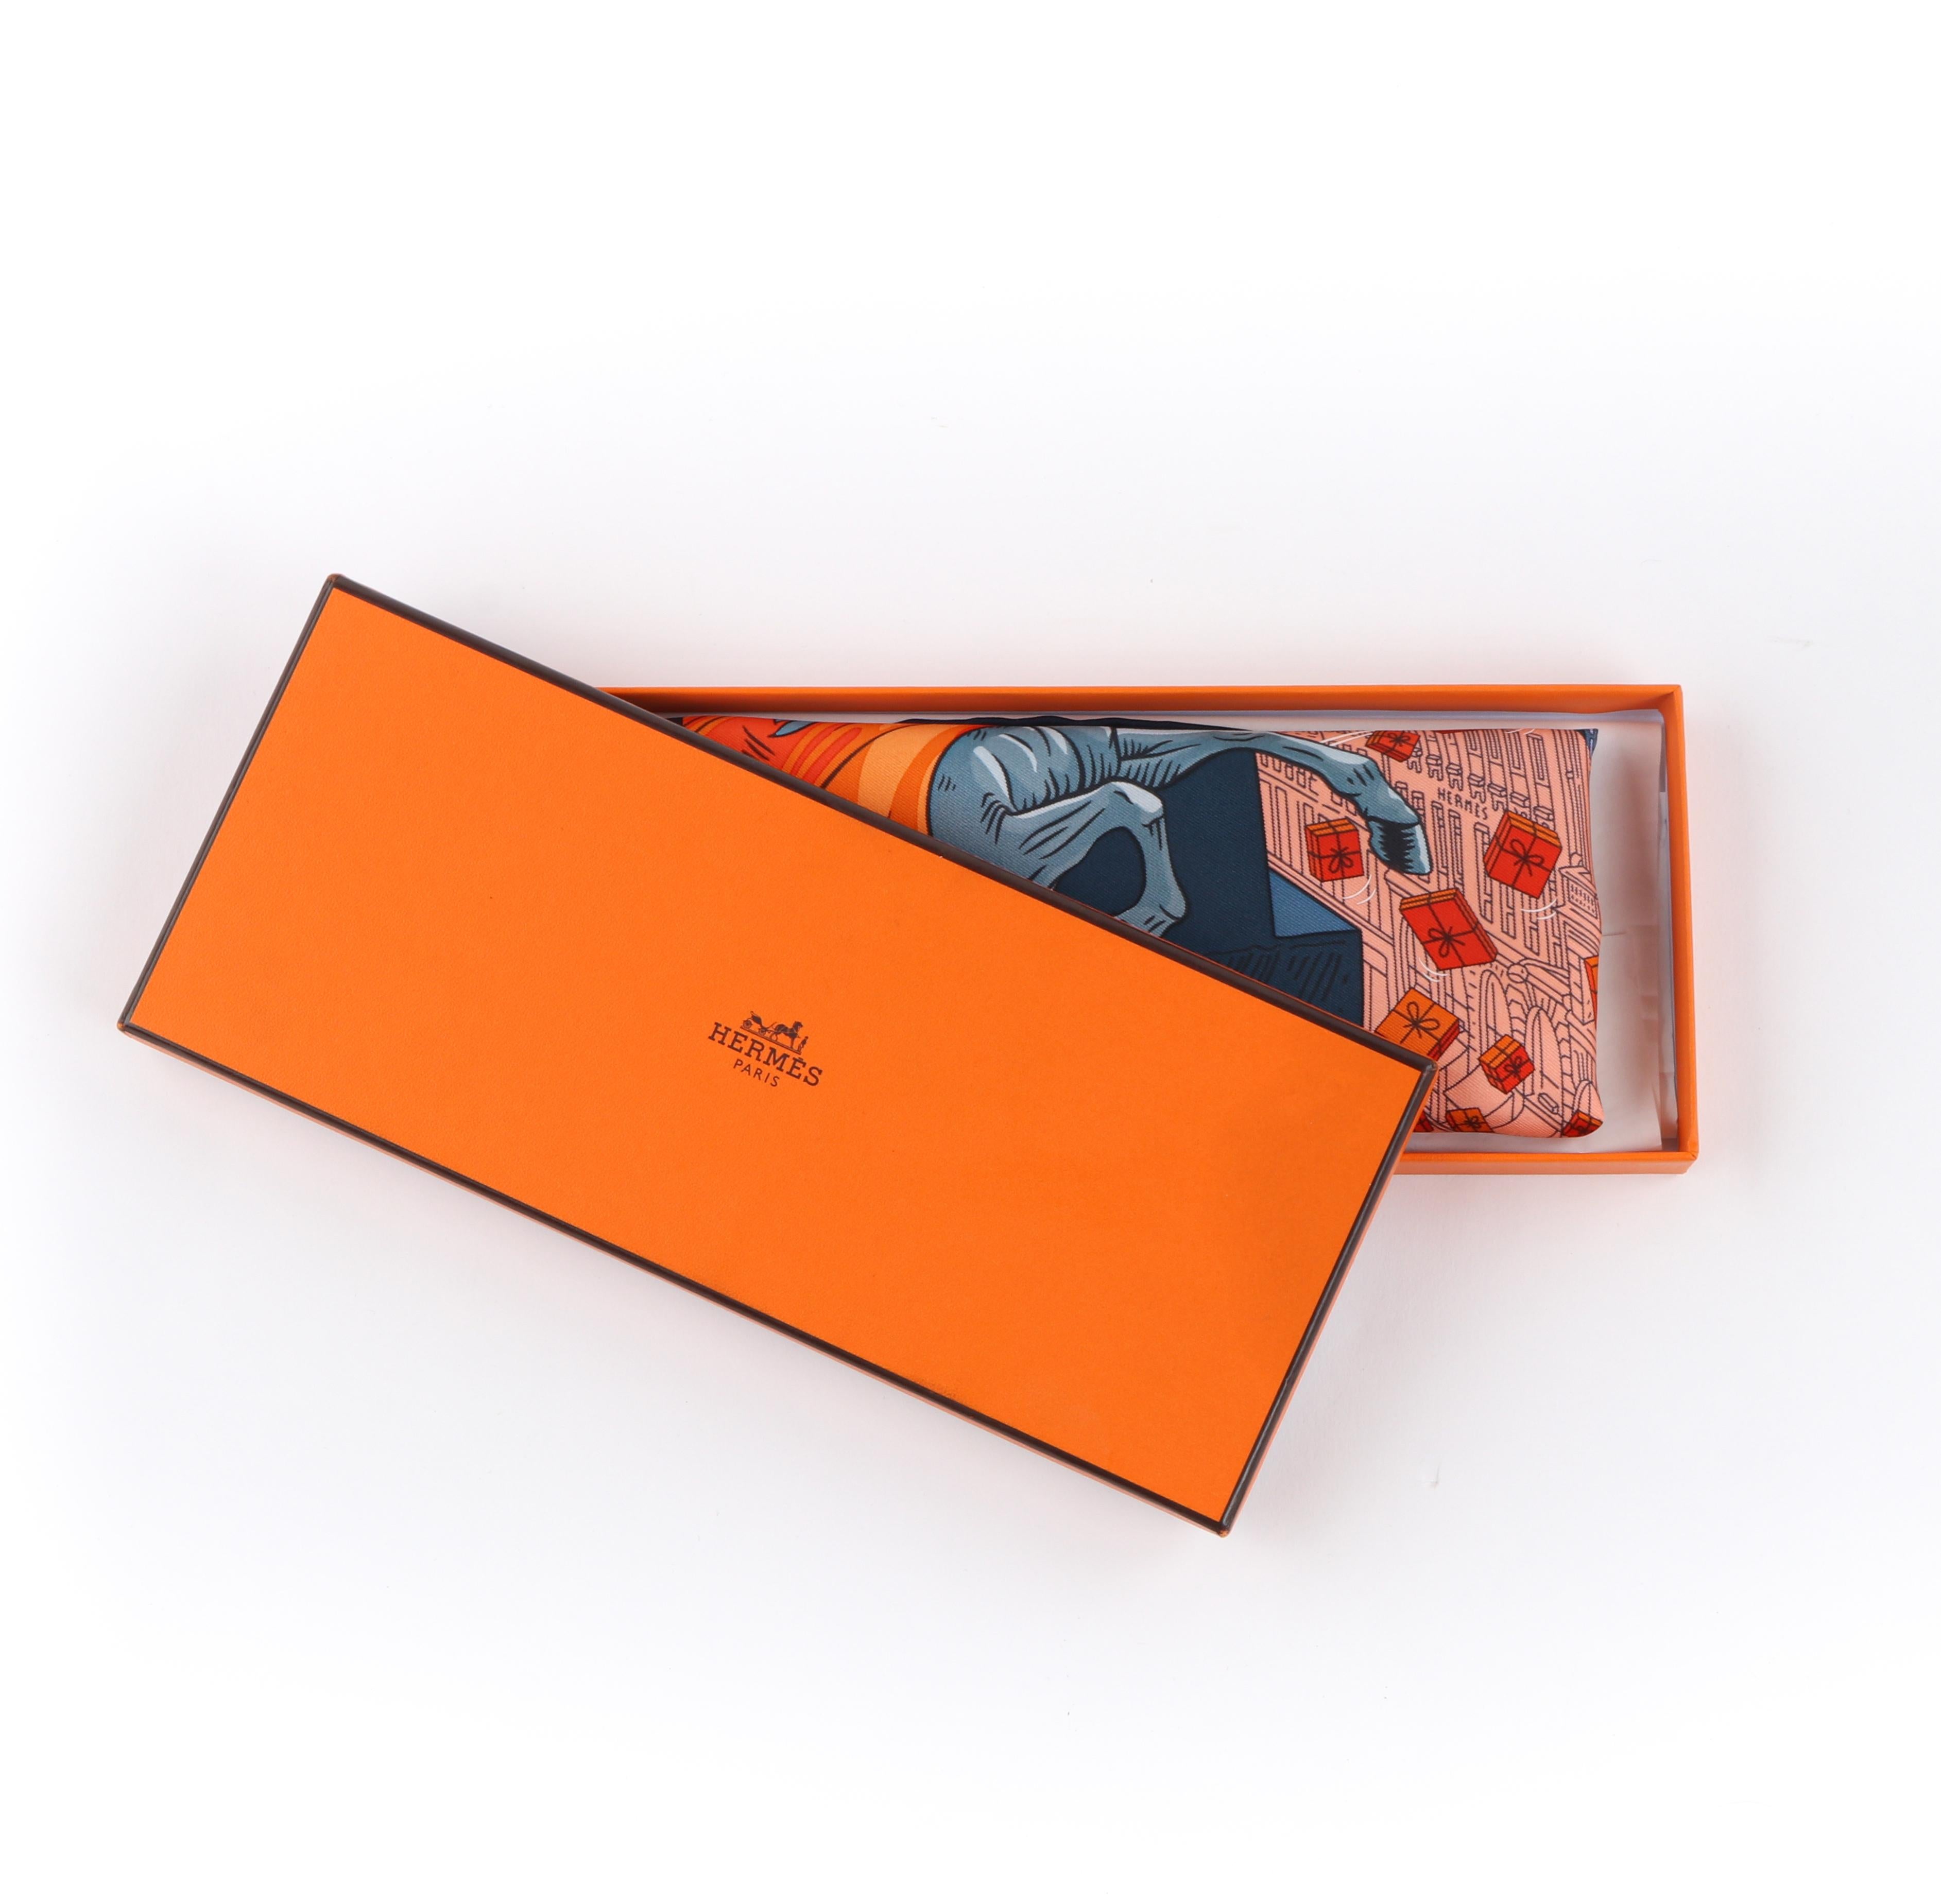 HERMES A/W 2017 Dimitri Rybaltchenko “Space Shopping Au Faubourg” Scarf w/Box
 
Brand/Manufacturer: Hermes
Collection: A/W 2017  
Designer: Dimitri Rybaltchenko 
Style: Square scarf
Color(s): Shades of blue, orange, black, white
Lined: No
Marked